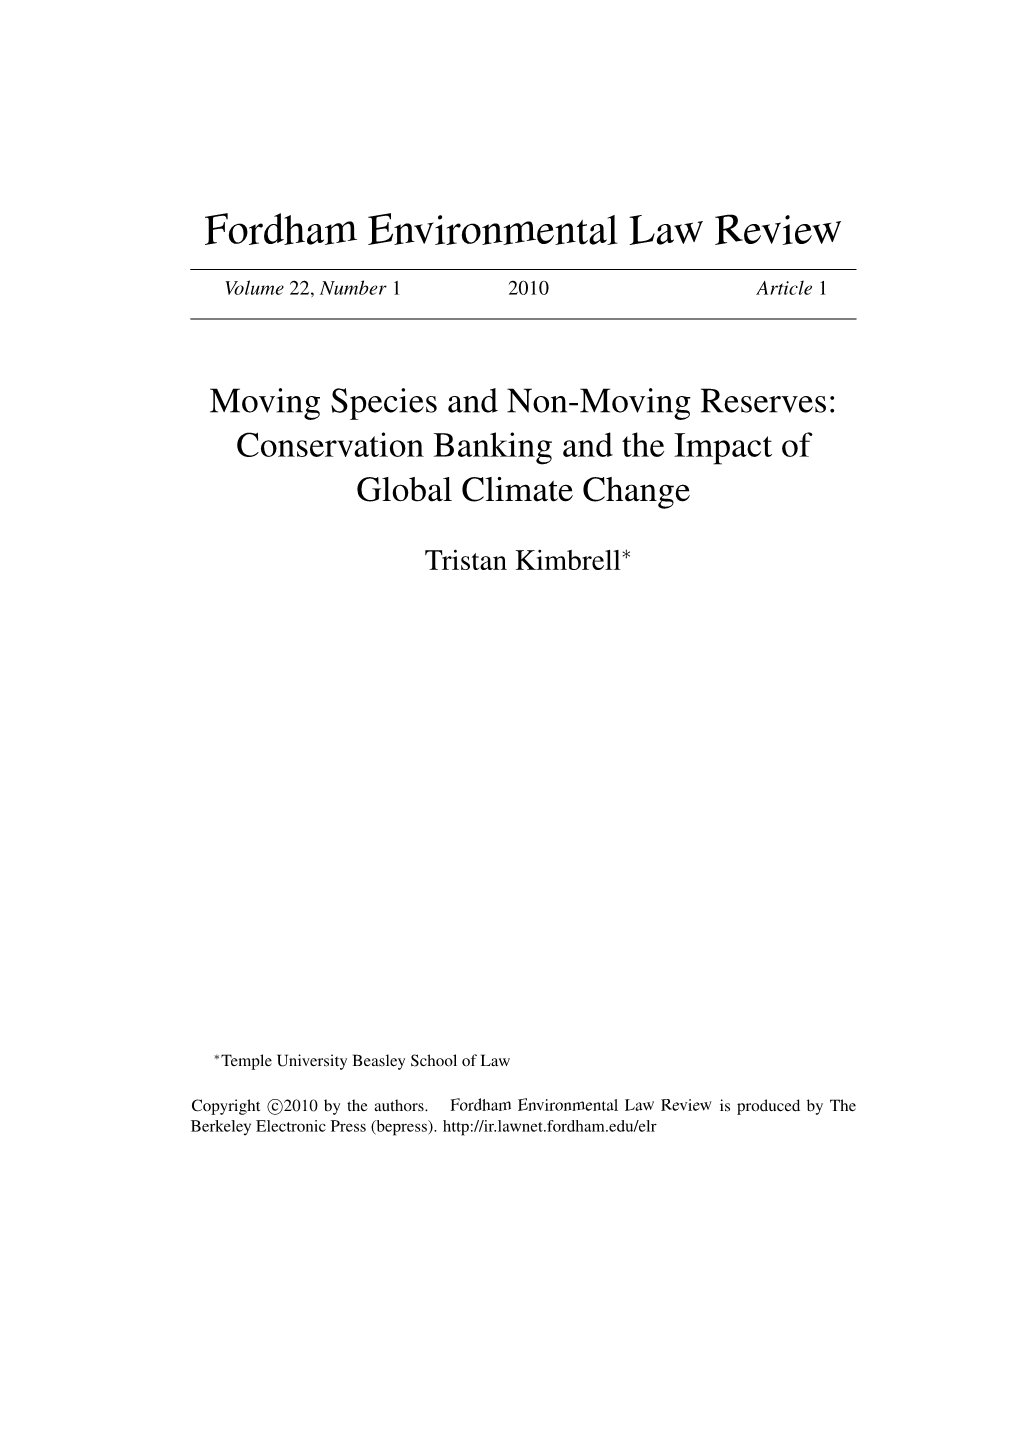 Moving Species and Non-Moving Reserves: Conservation Banking and the Impact of Global Climate Change